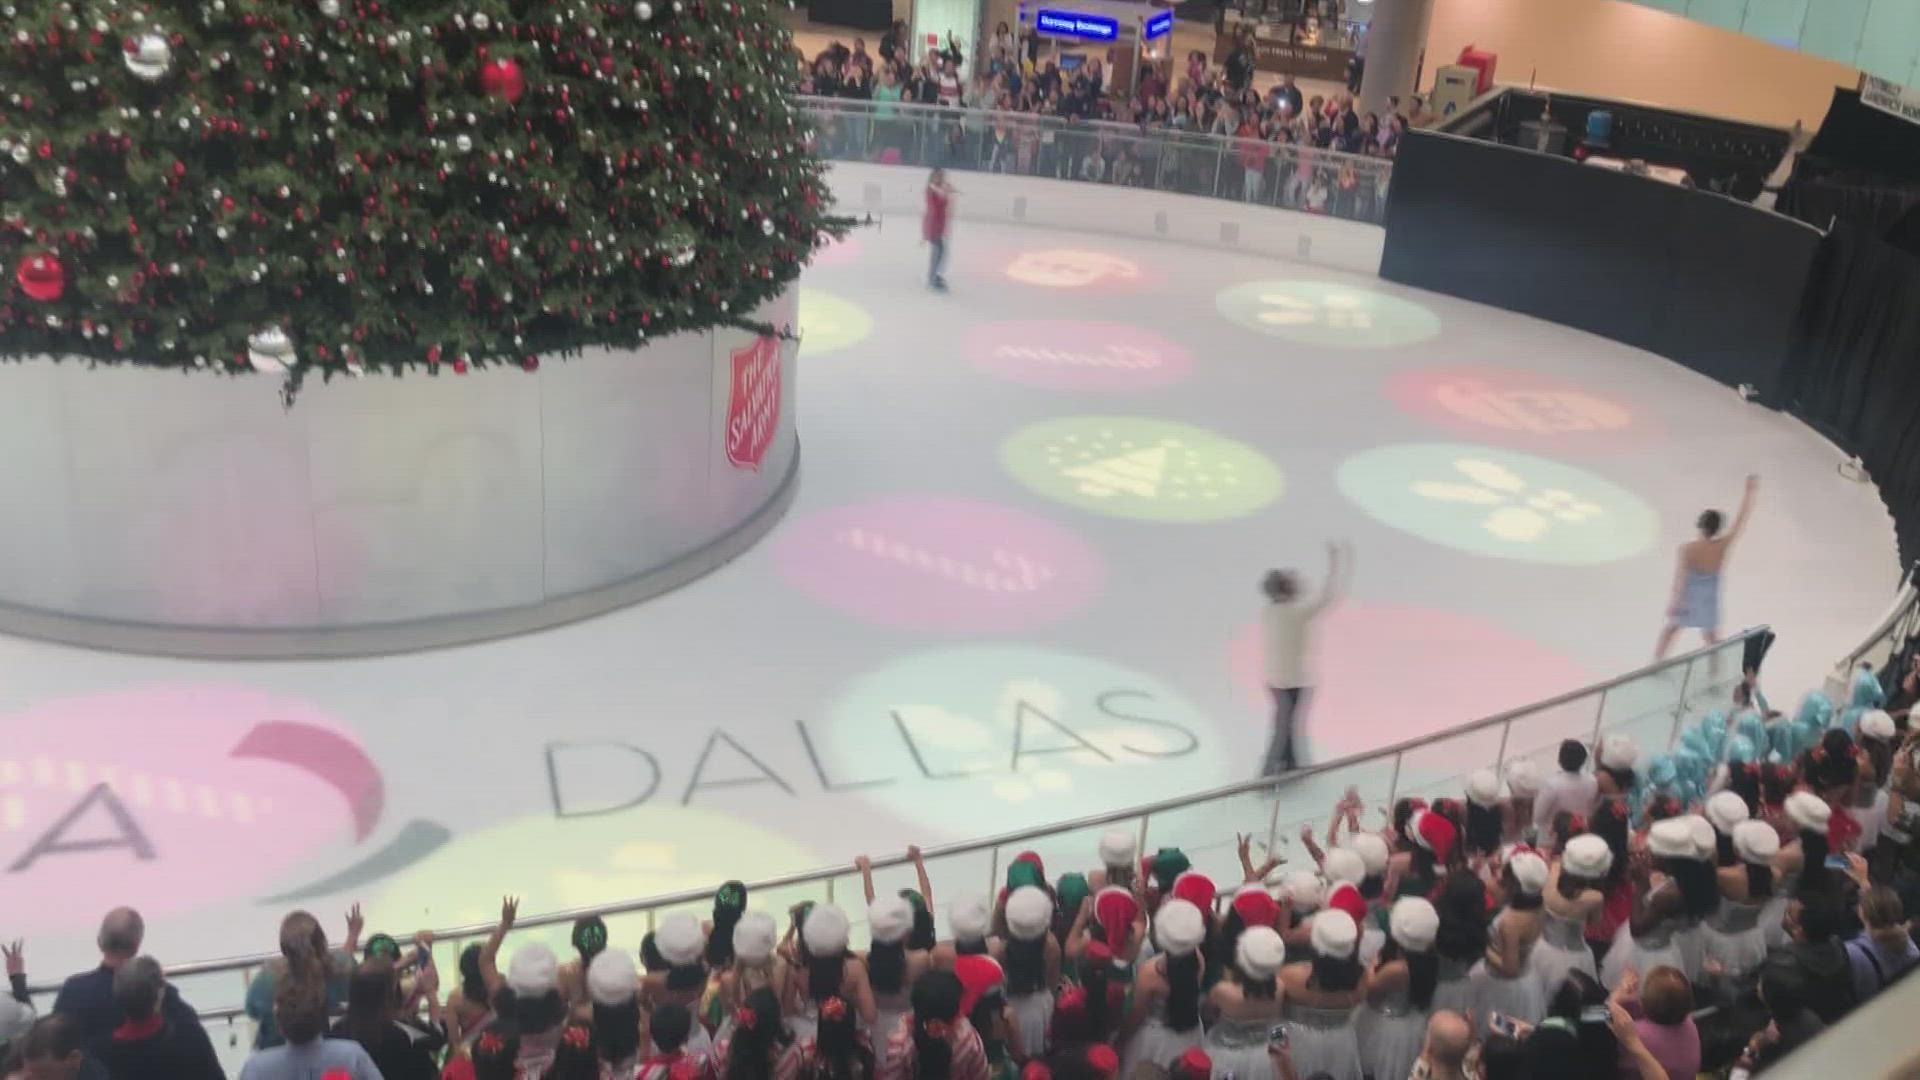 Giddy up with Santa, catch a skating show, watch the Dallas Cowboys Christmas Extravaganza and/or look around for holiday lights!